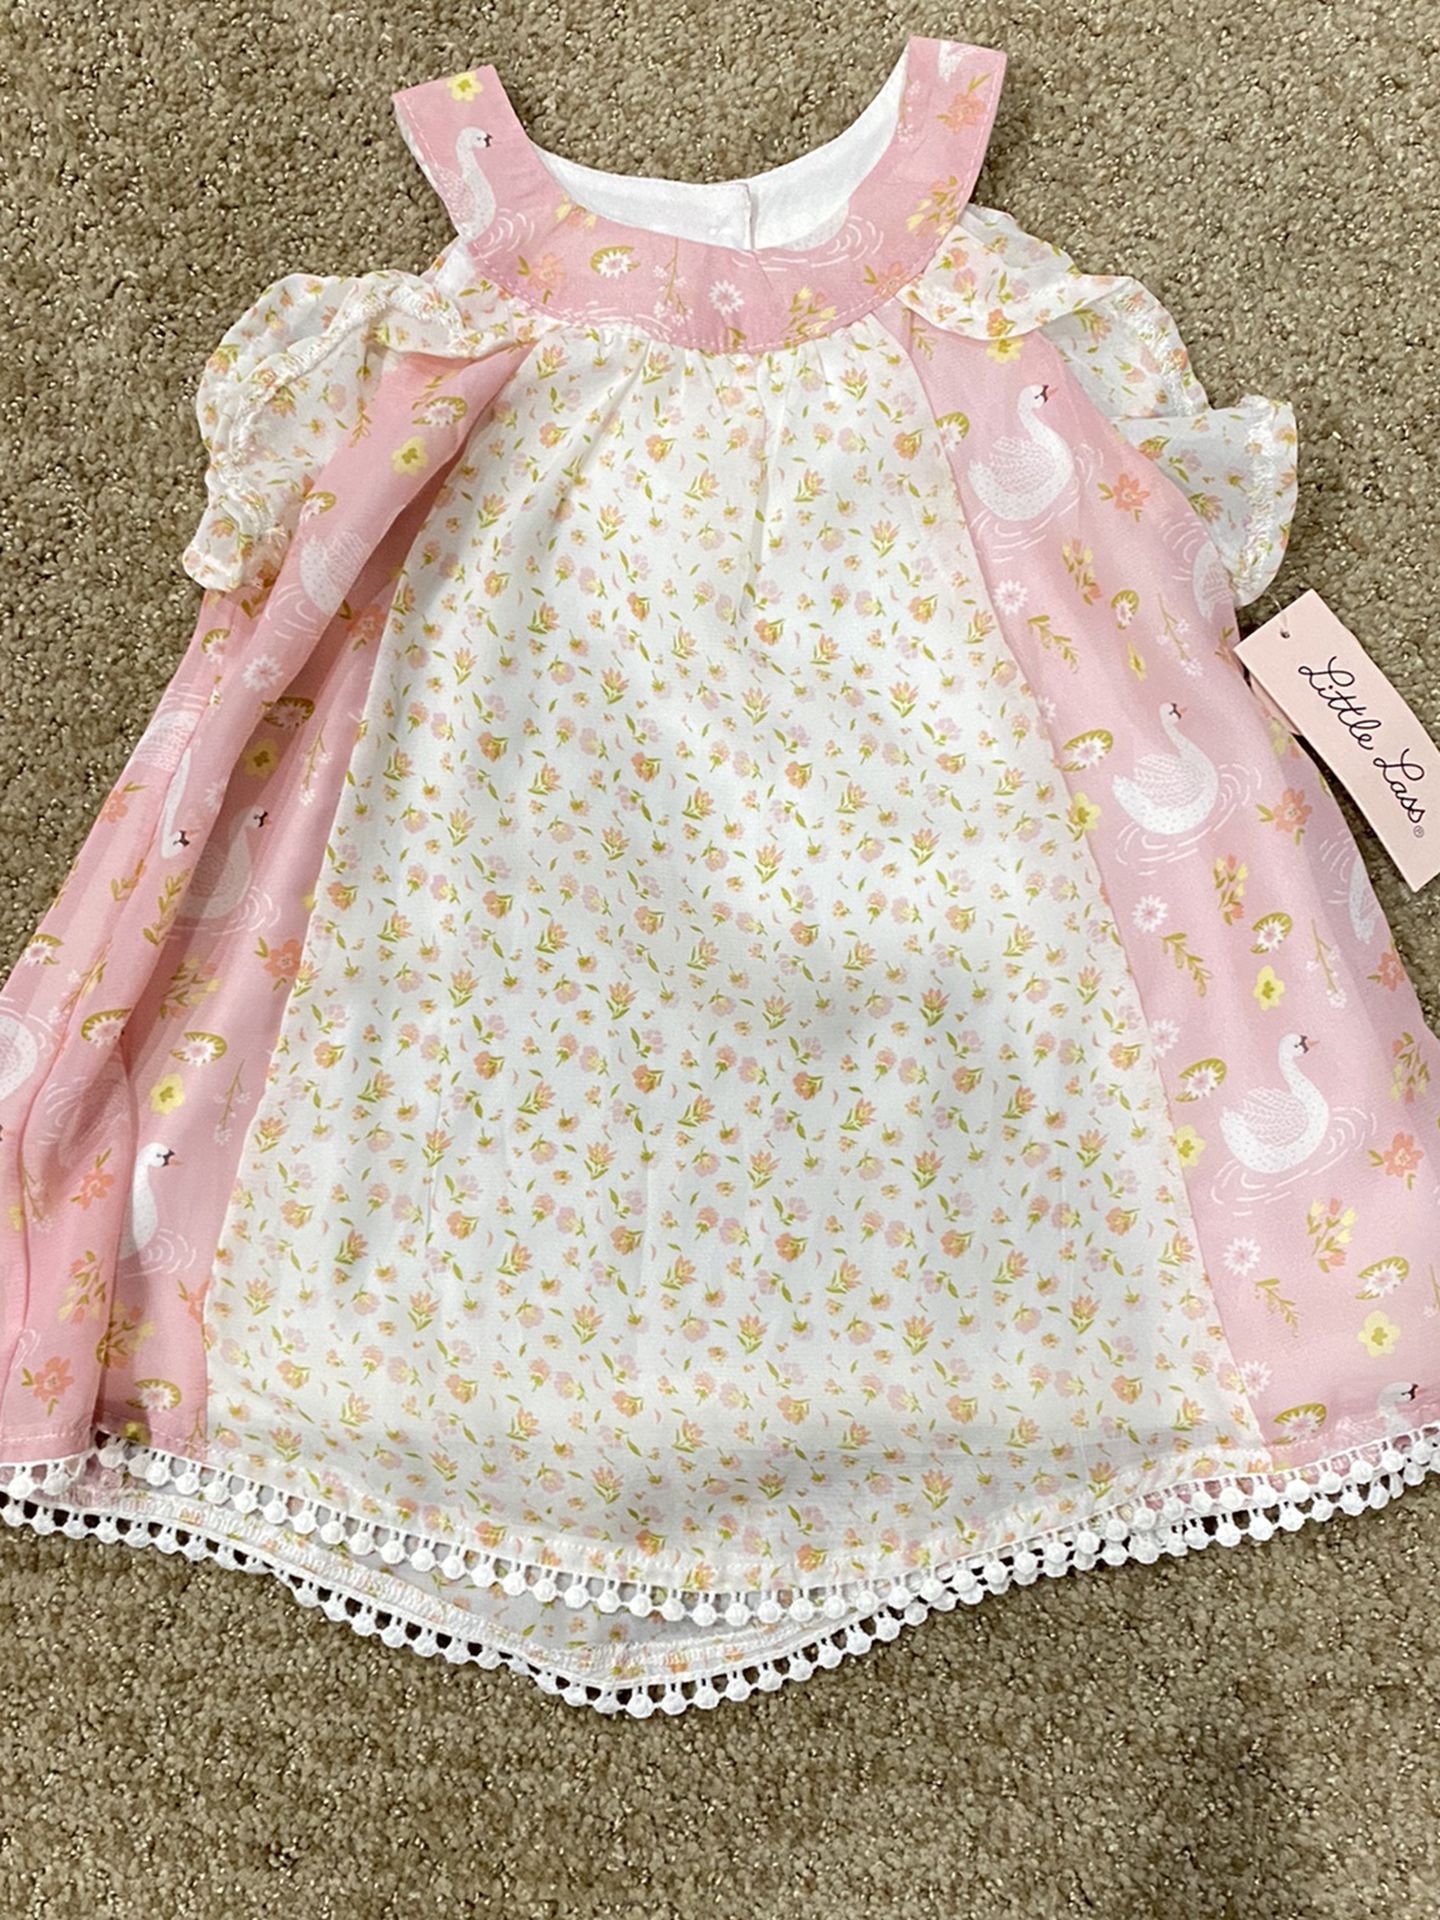 Girls Size 4t New With Tags